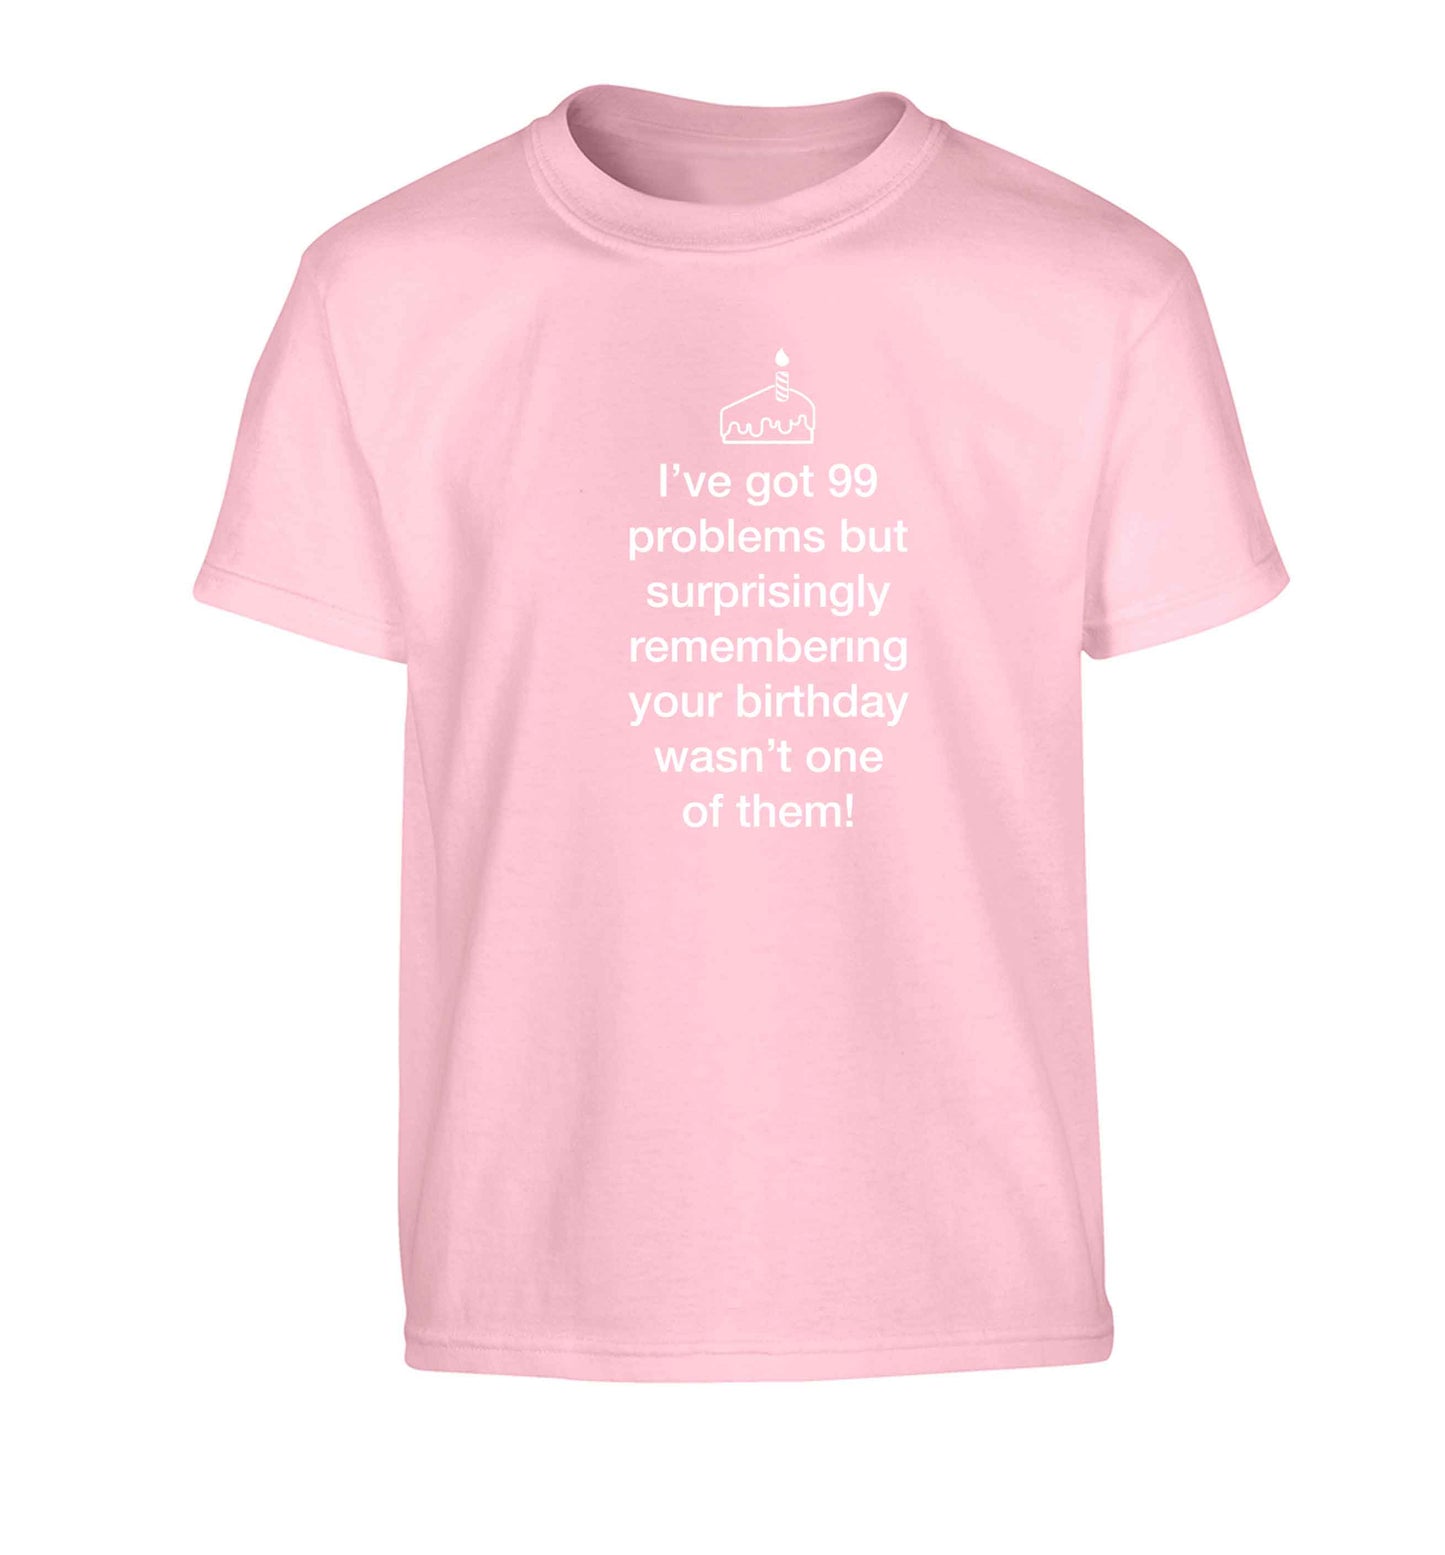 I've got 99 problems but surprisingly remembering your birthday wasn't one of them! Children's light pink Tshirt 12-13 Years